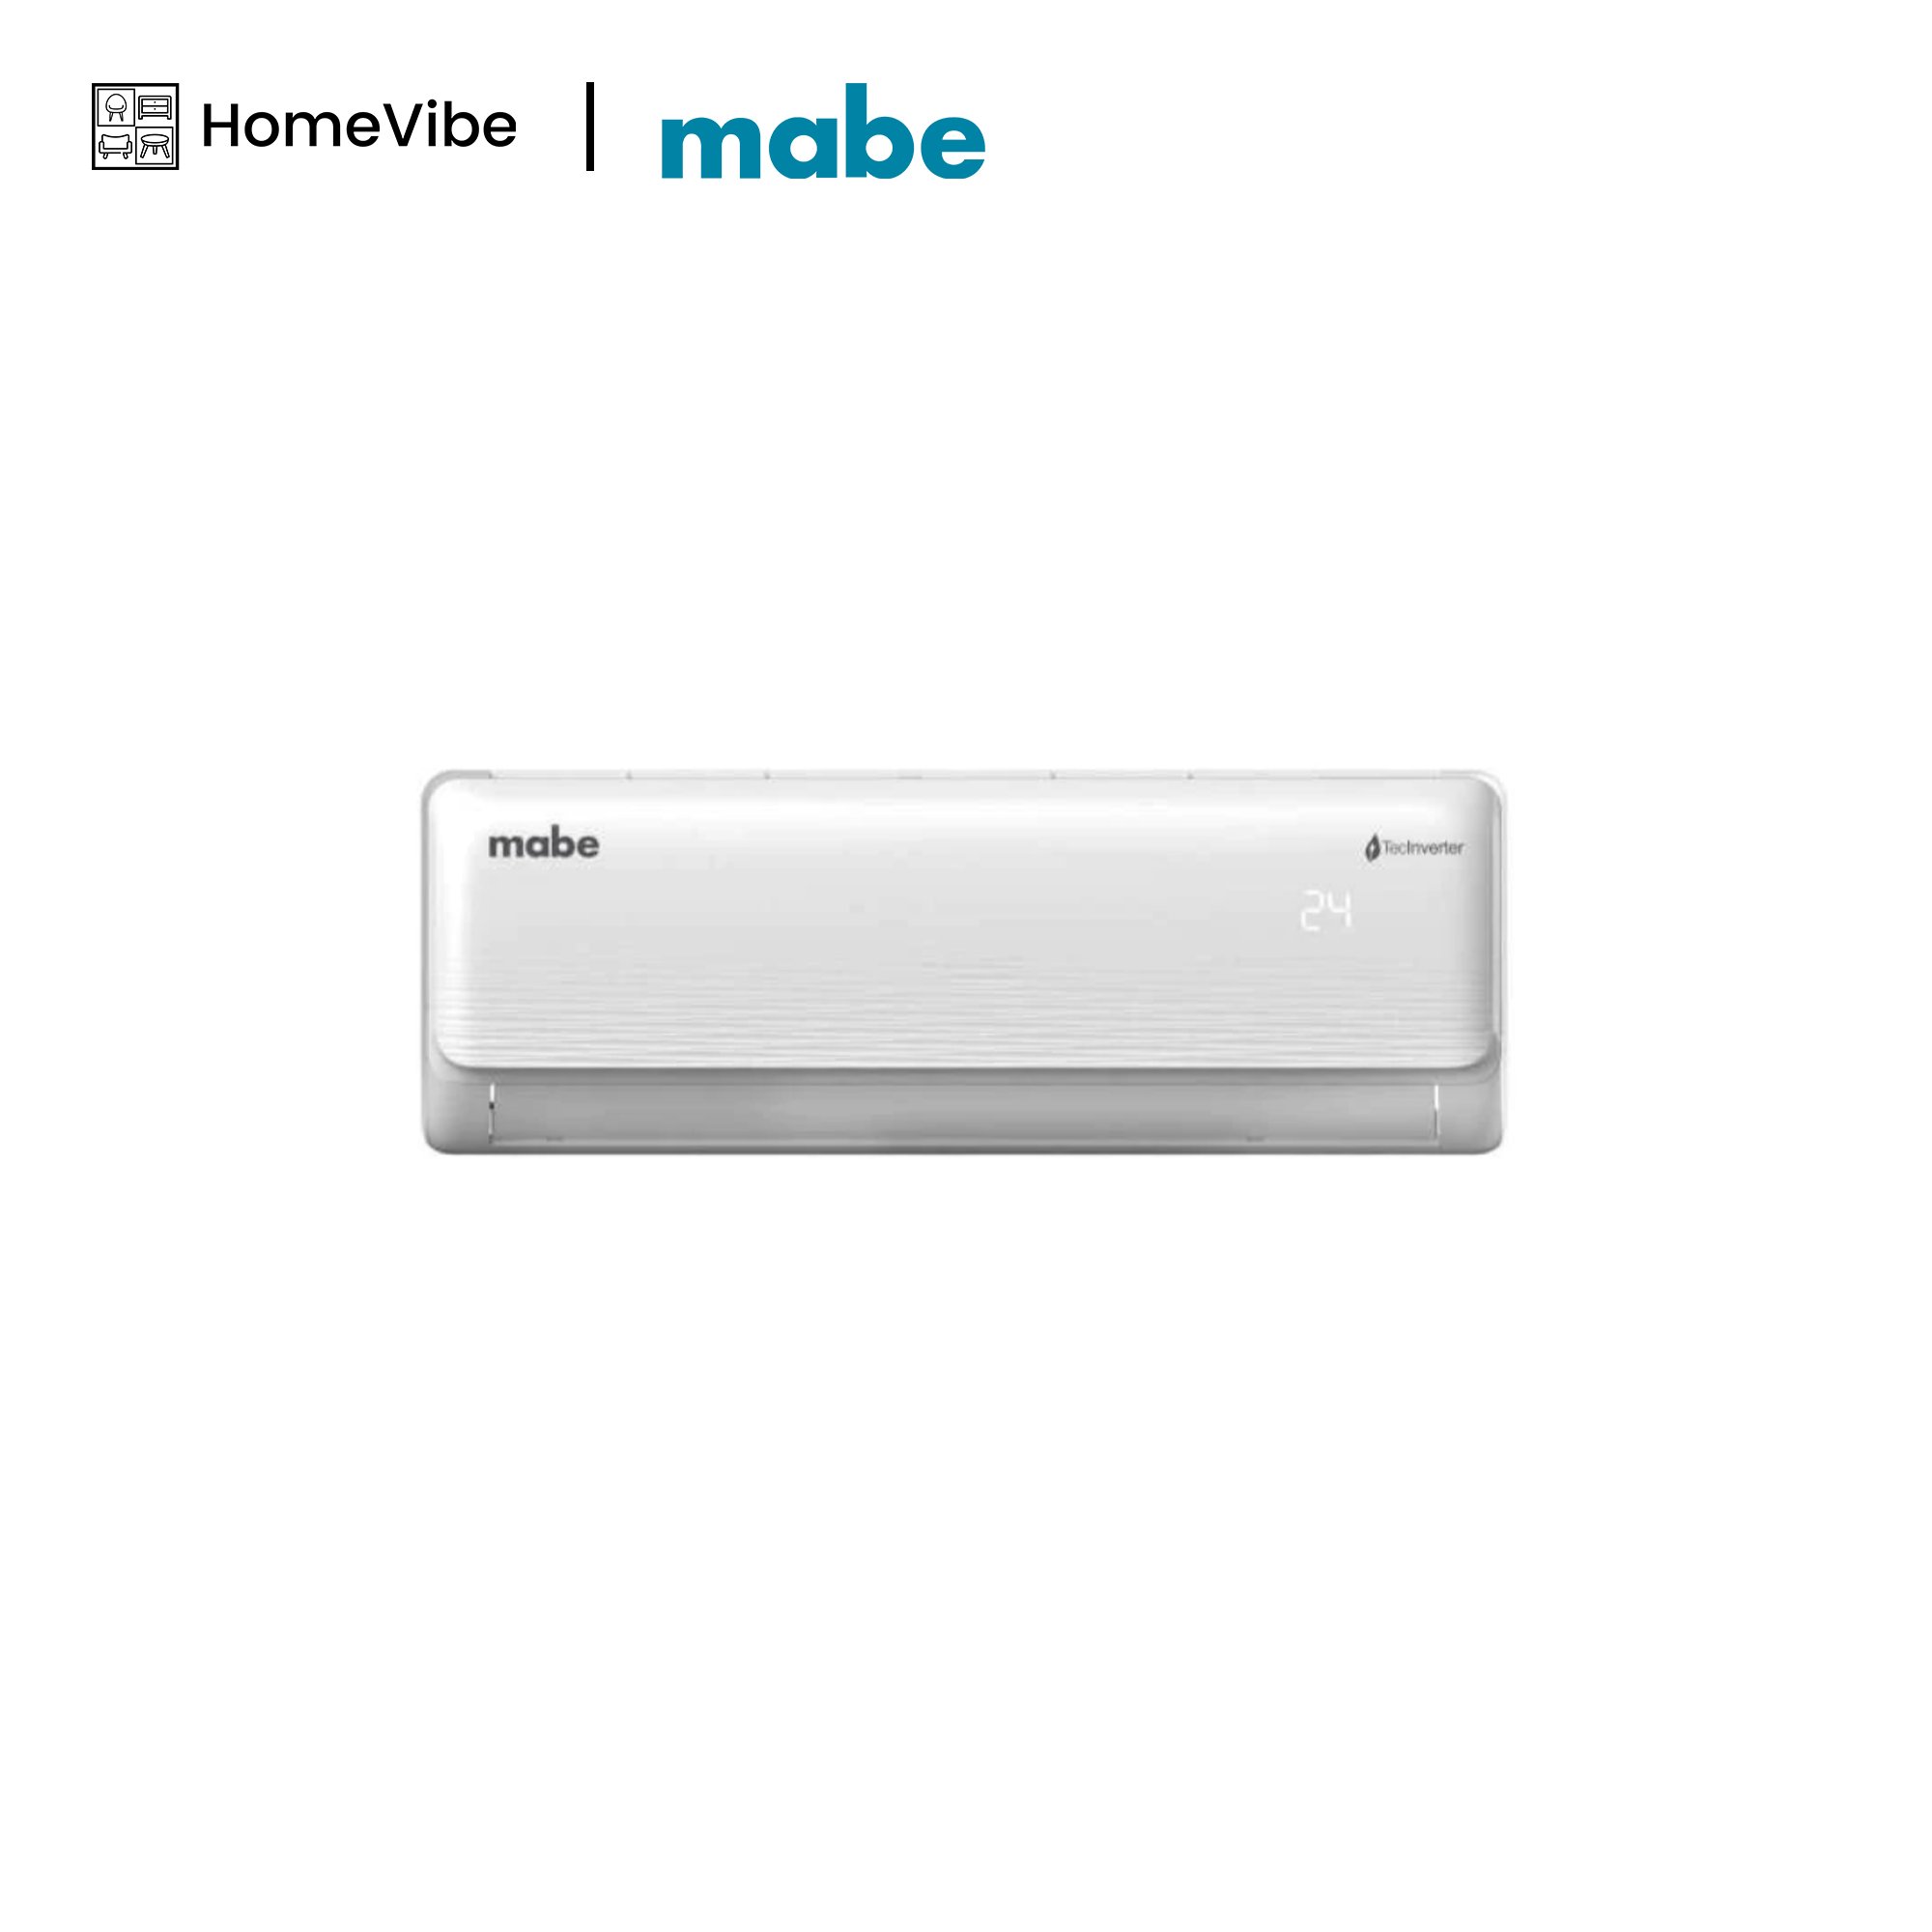 Mabe 1.5hp INVERTER Split Type Air Conditioner MMI12CDBWCCAXIP9